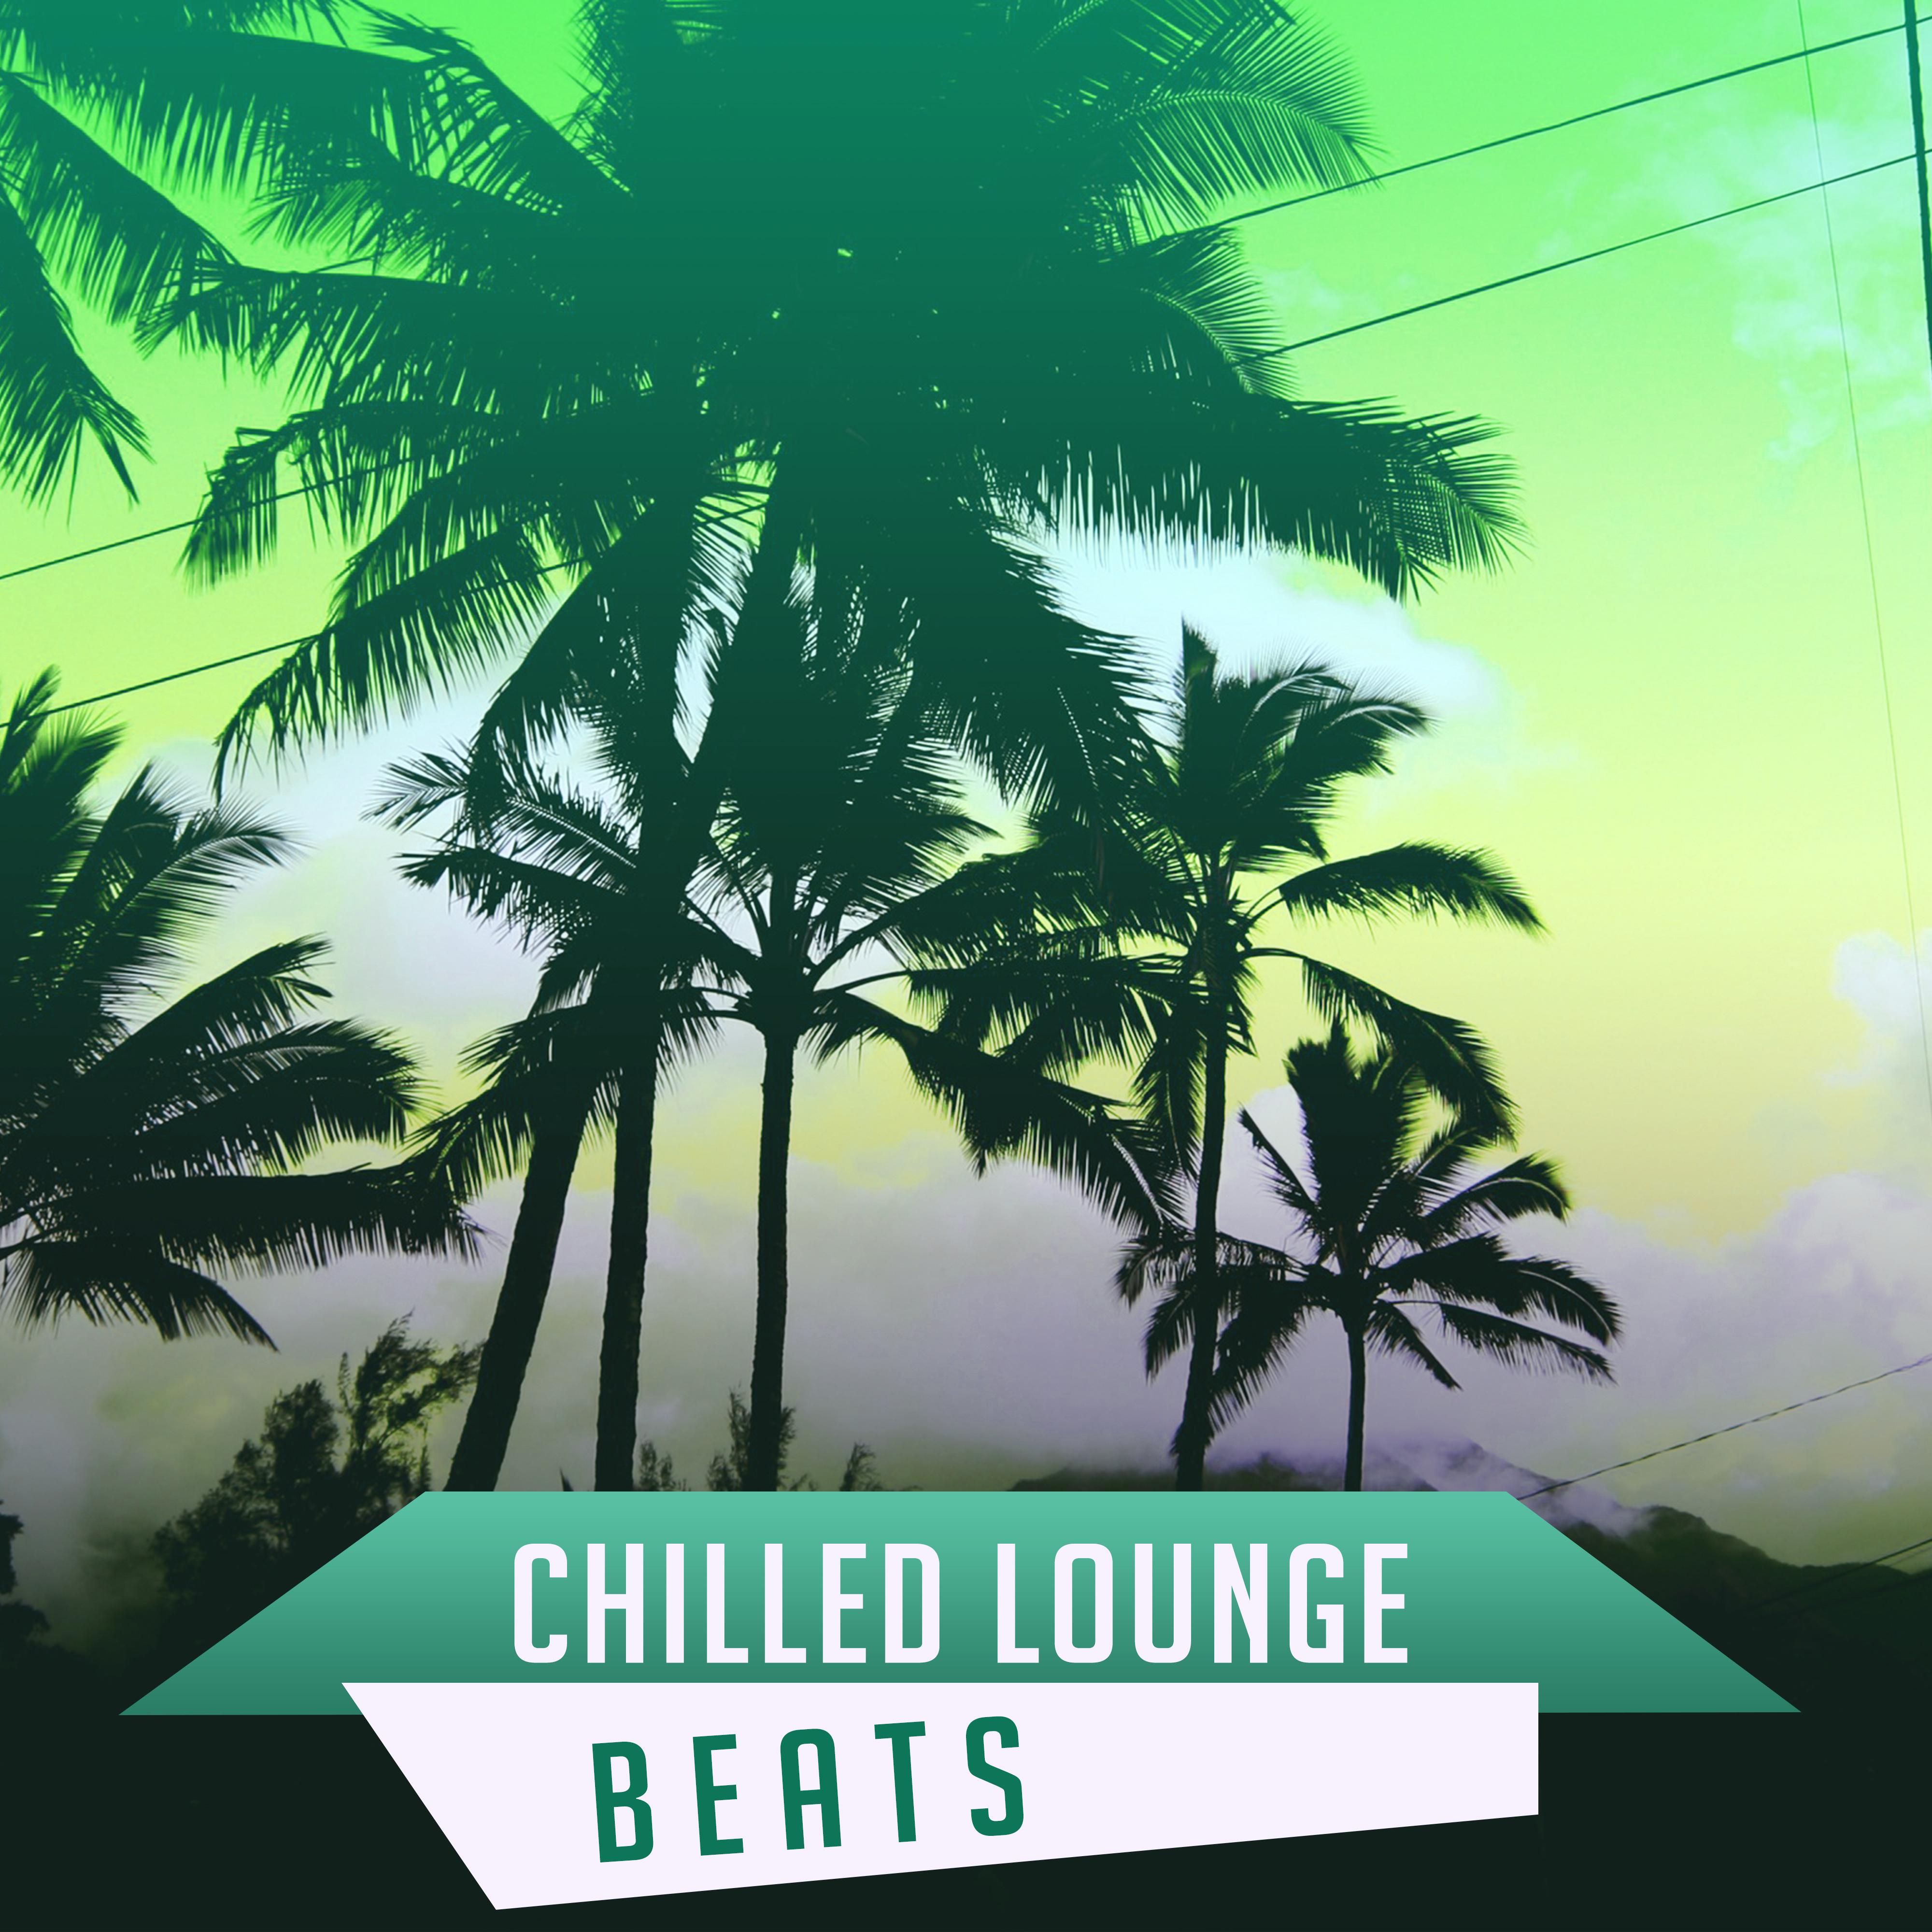 Chilled Lounge Beats – Ibiza 2017, Lounge Summer, Beach House, Chillout After Dark, Holiday, Relax, Summer Hits